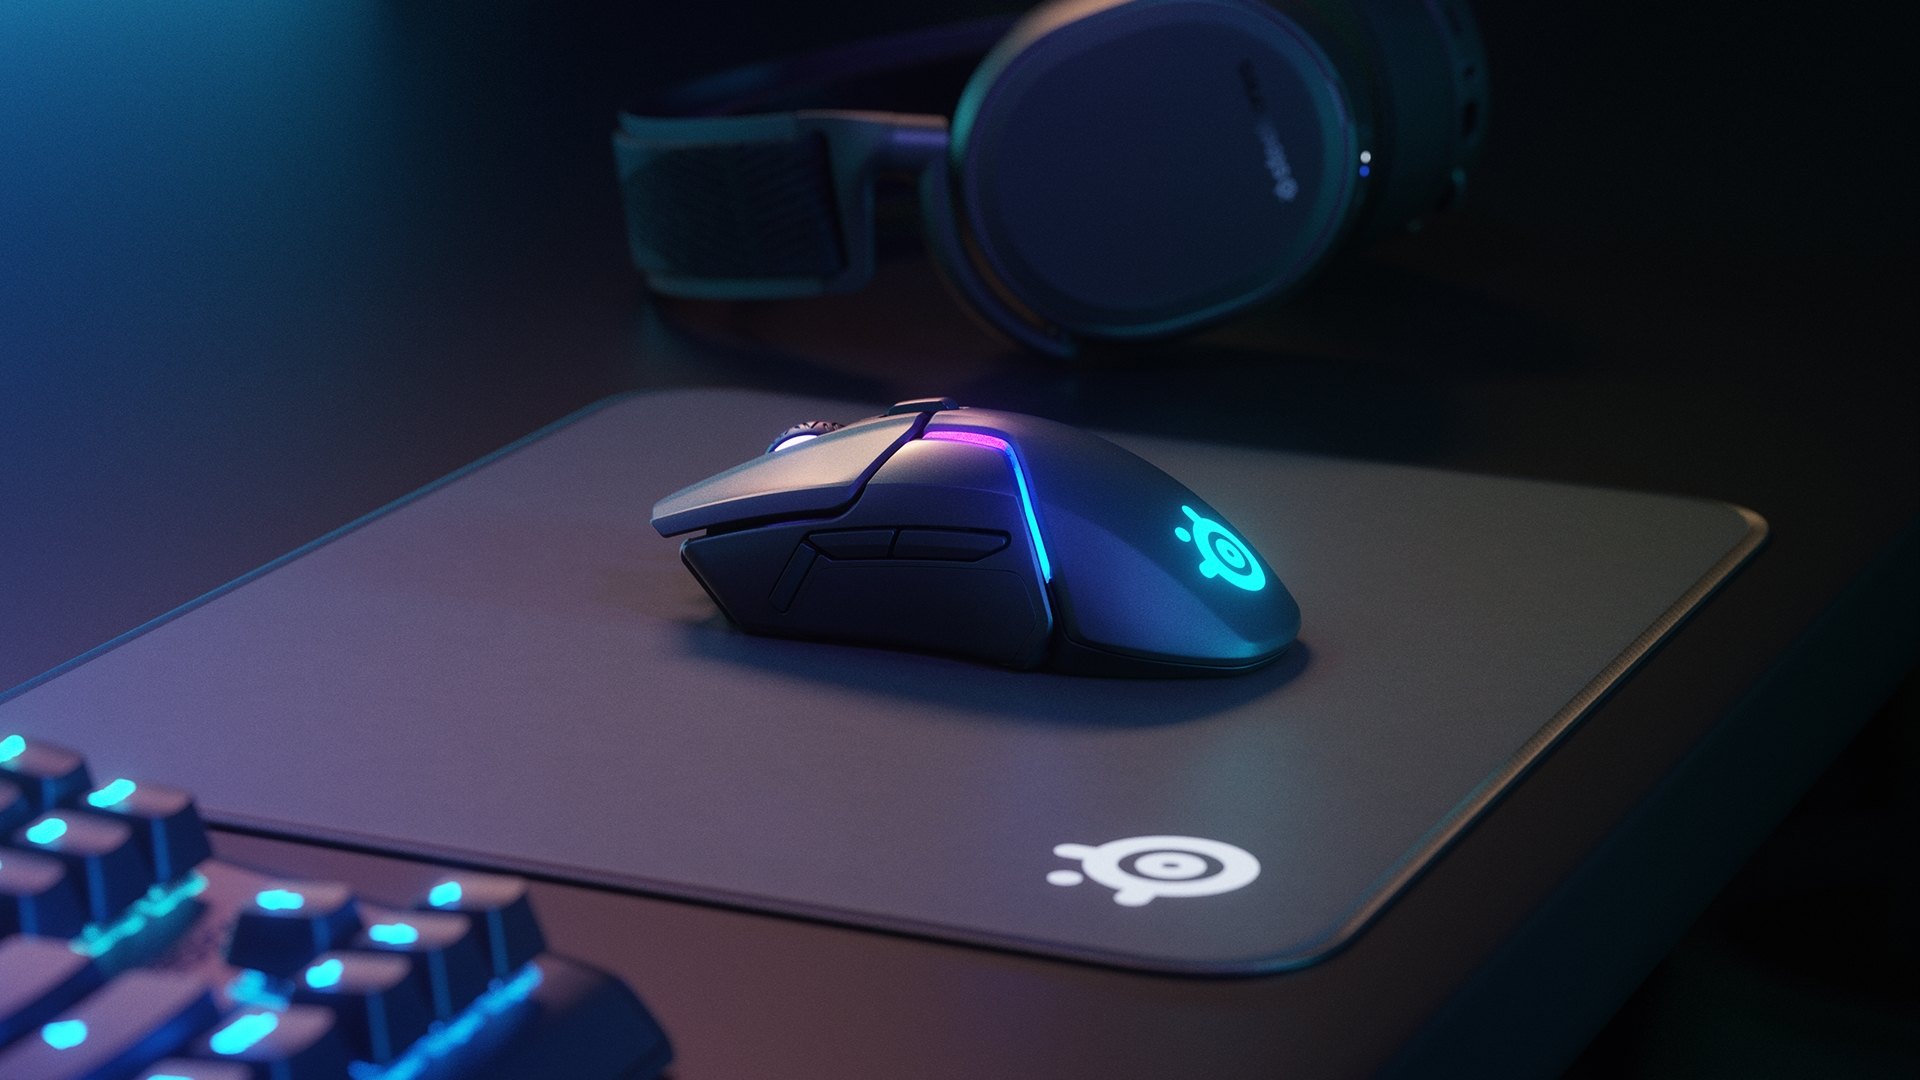 Get up to 33% off the SteelSeries Rival 650 wireless gaming mouse